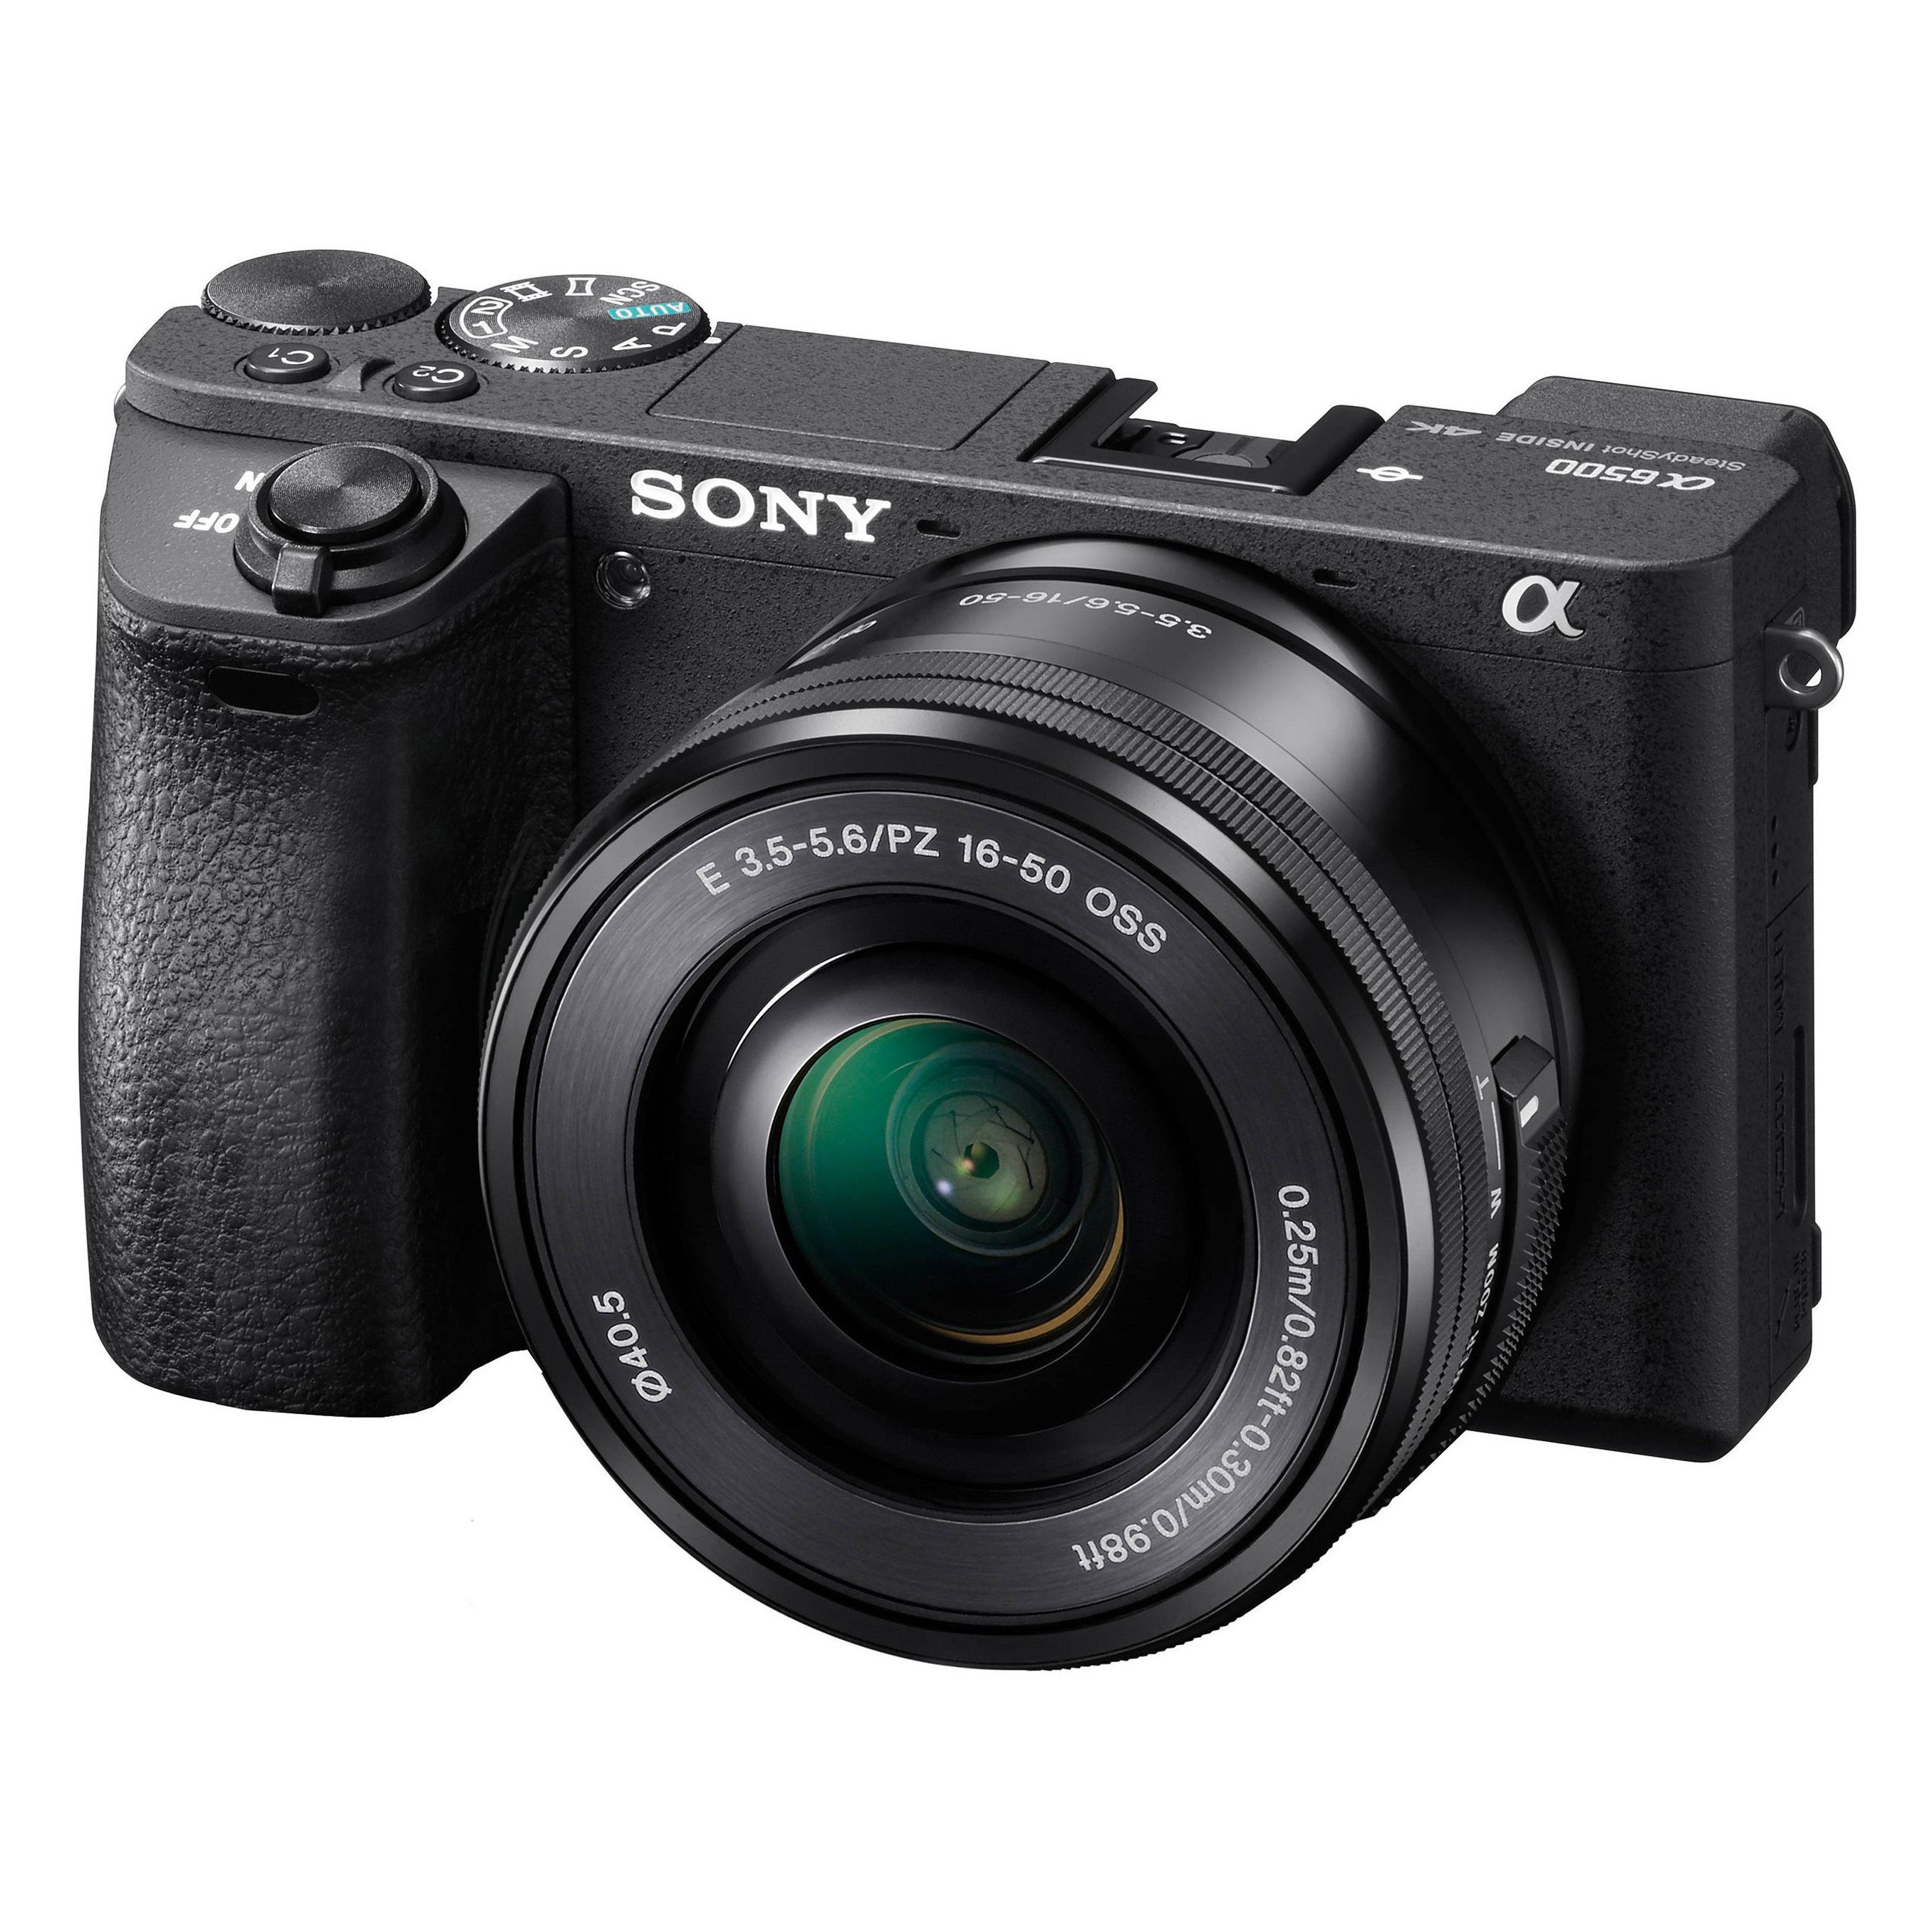 8 Best Sony Camera Reviews in 2018 - Top Rated Digital and ...